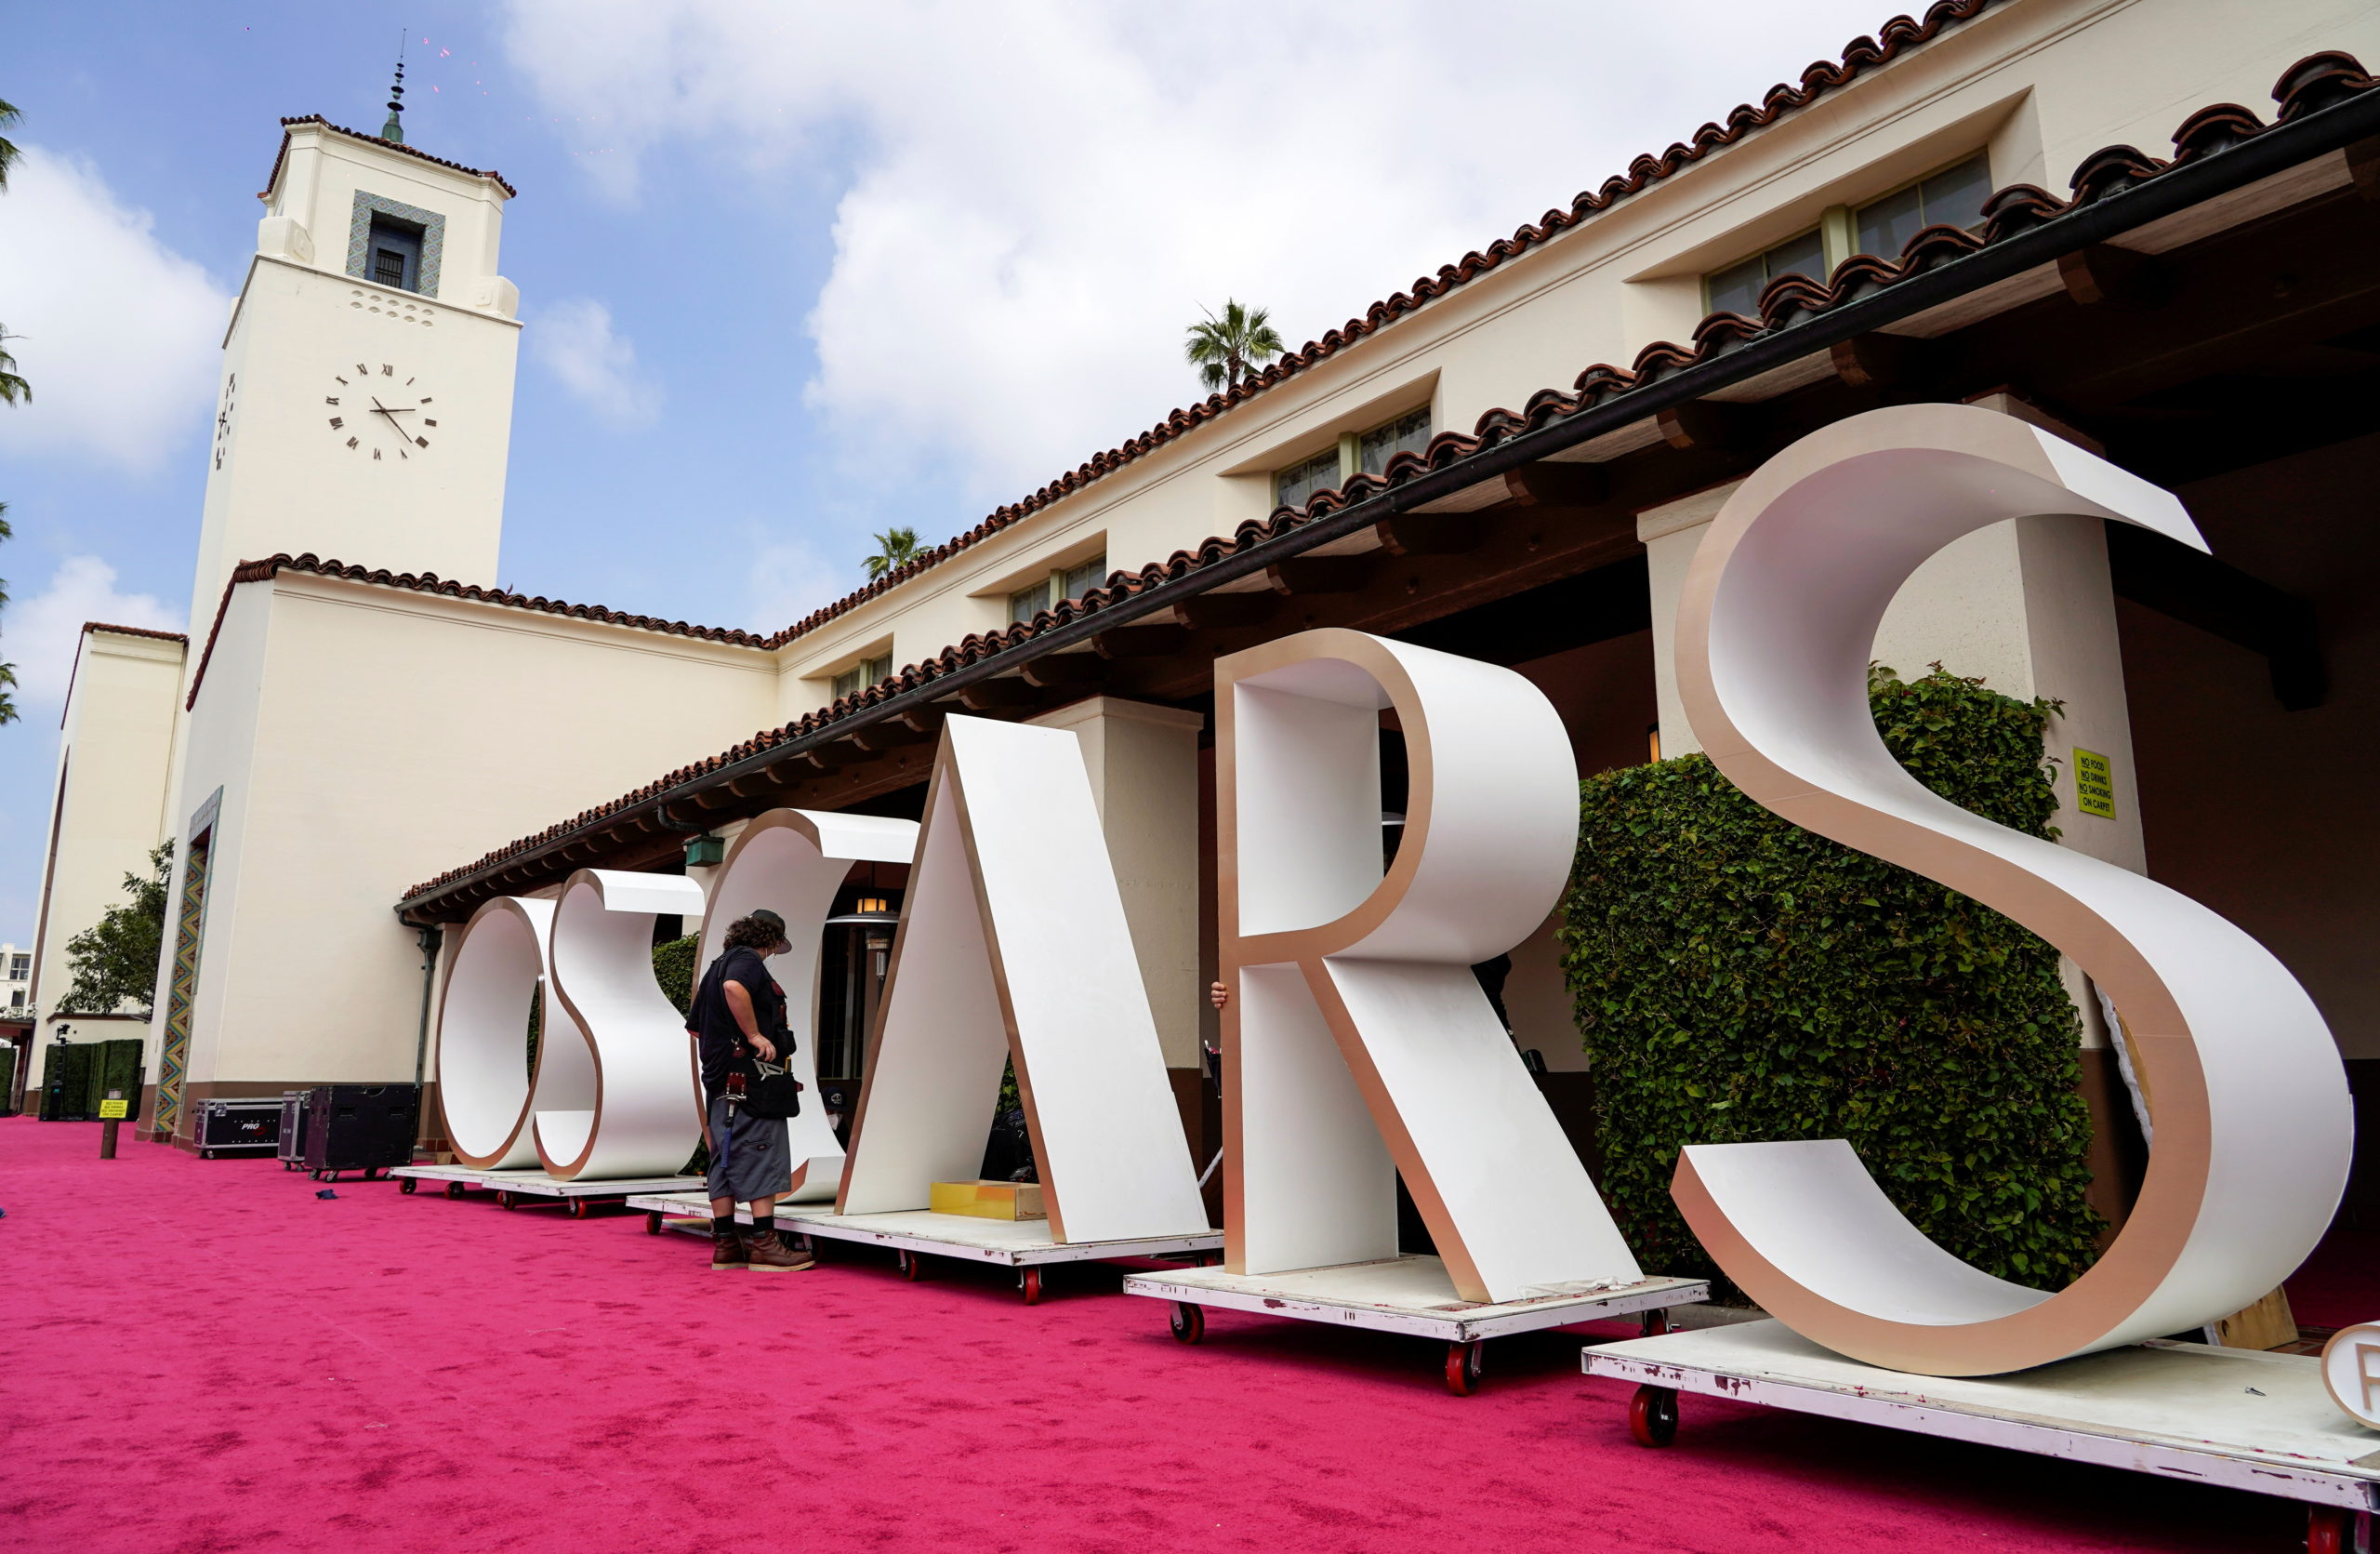 A crew member looks over a background element for the red carpet at Union Station, one of the locations for the 93rd Academy Awards in Los Angeles, California, U.S.  April 24, 2021. Chris Pizzello/Pool via REUTERS